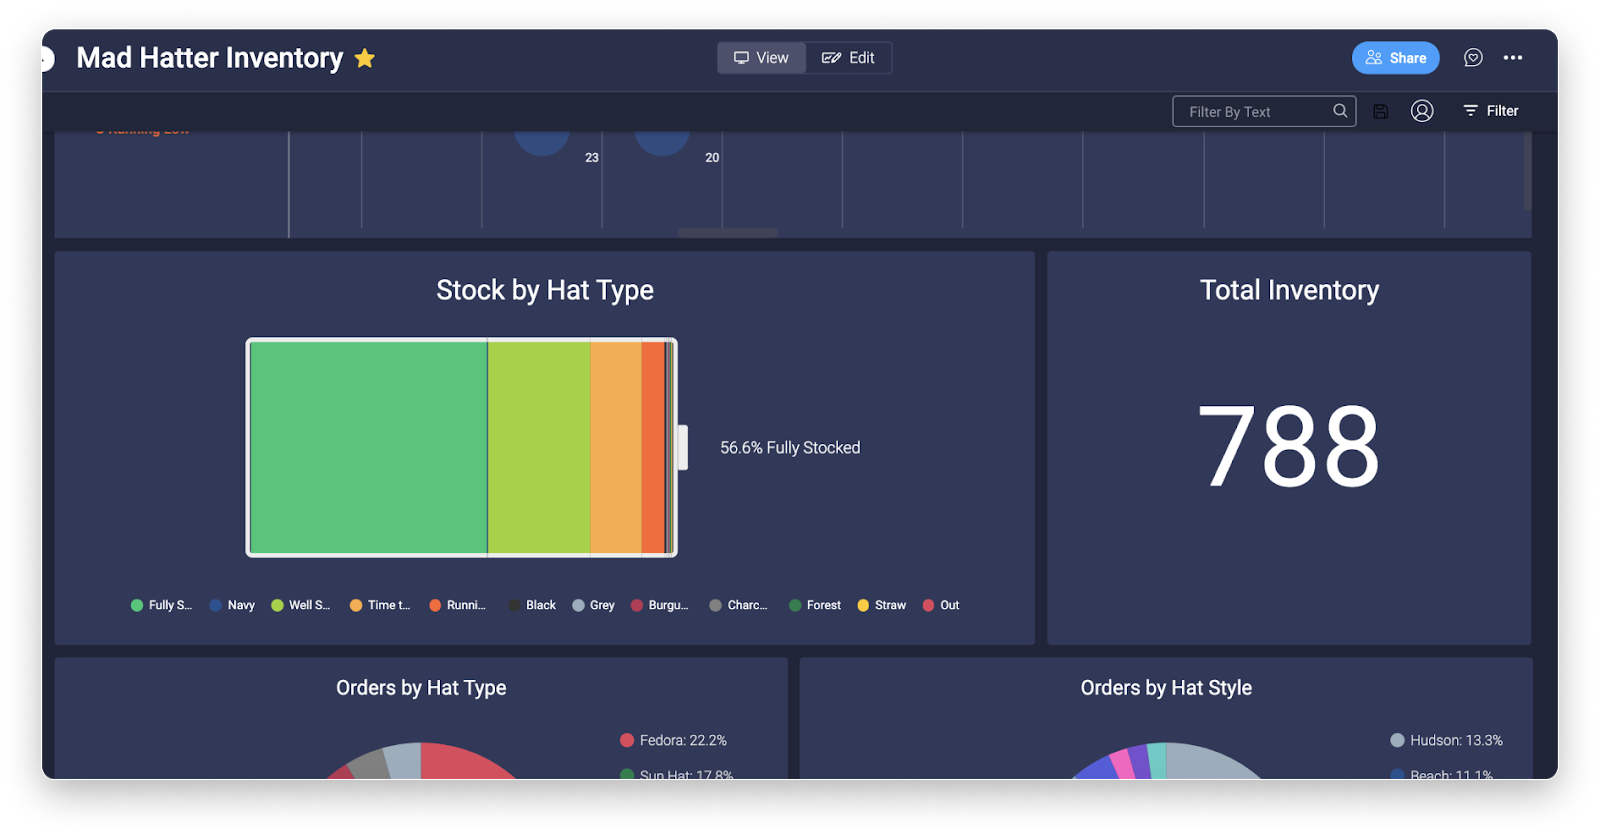 screenshot of inventory dashboard in monday.com